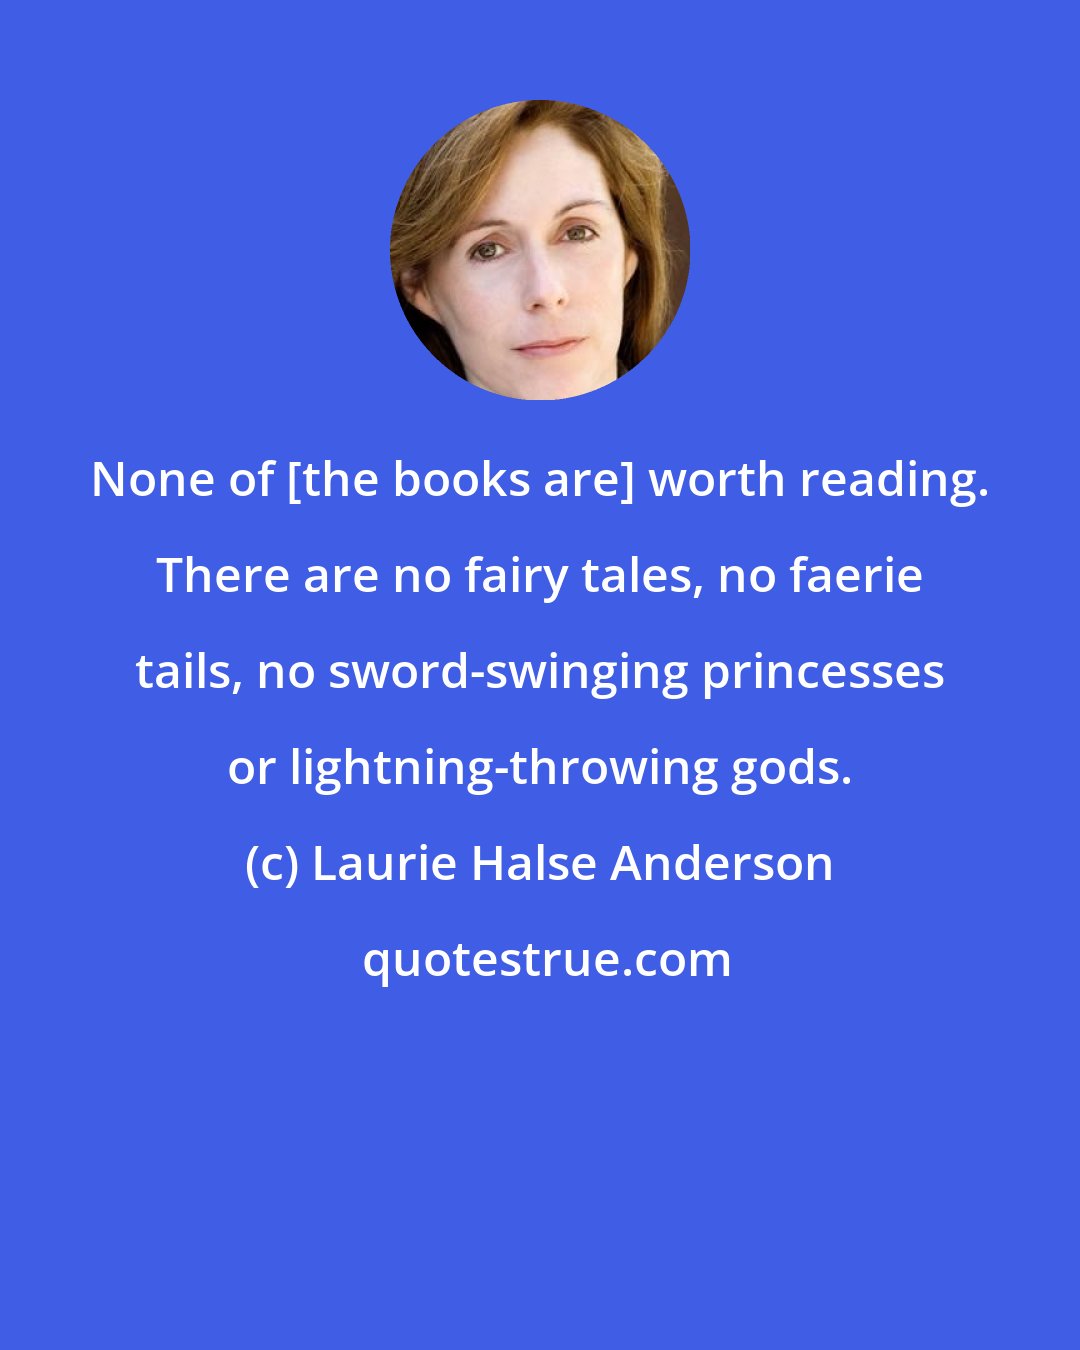 Laurie Halse Anderson: None of [the books are] worth reading. There are no fairy tales, no faerie tails, no sword-swinging princesses or lightning-throwing gods.